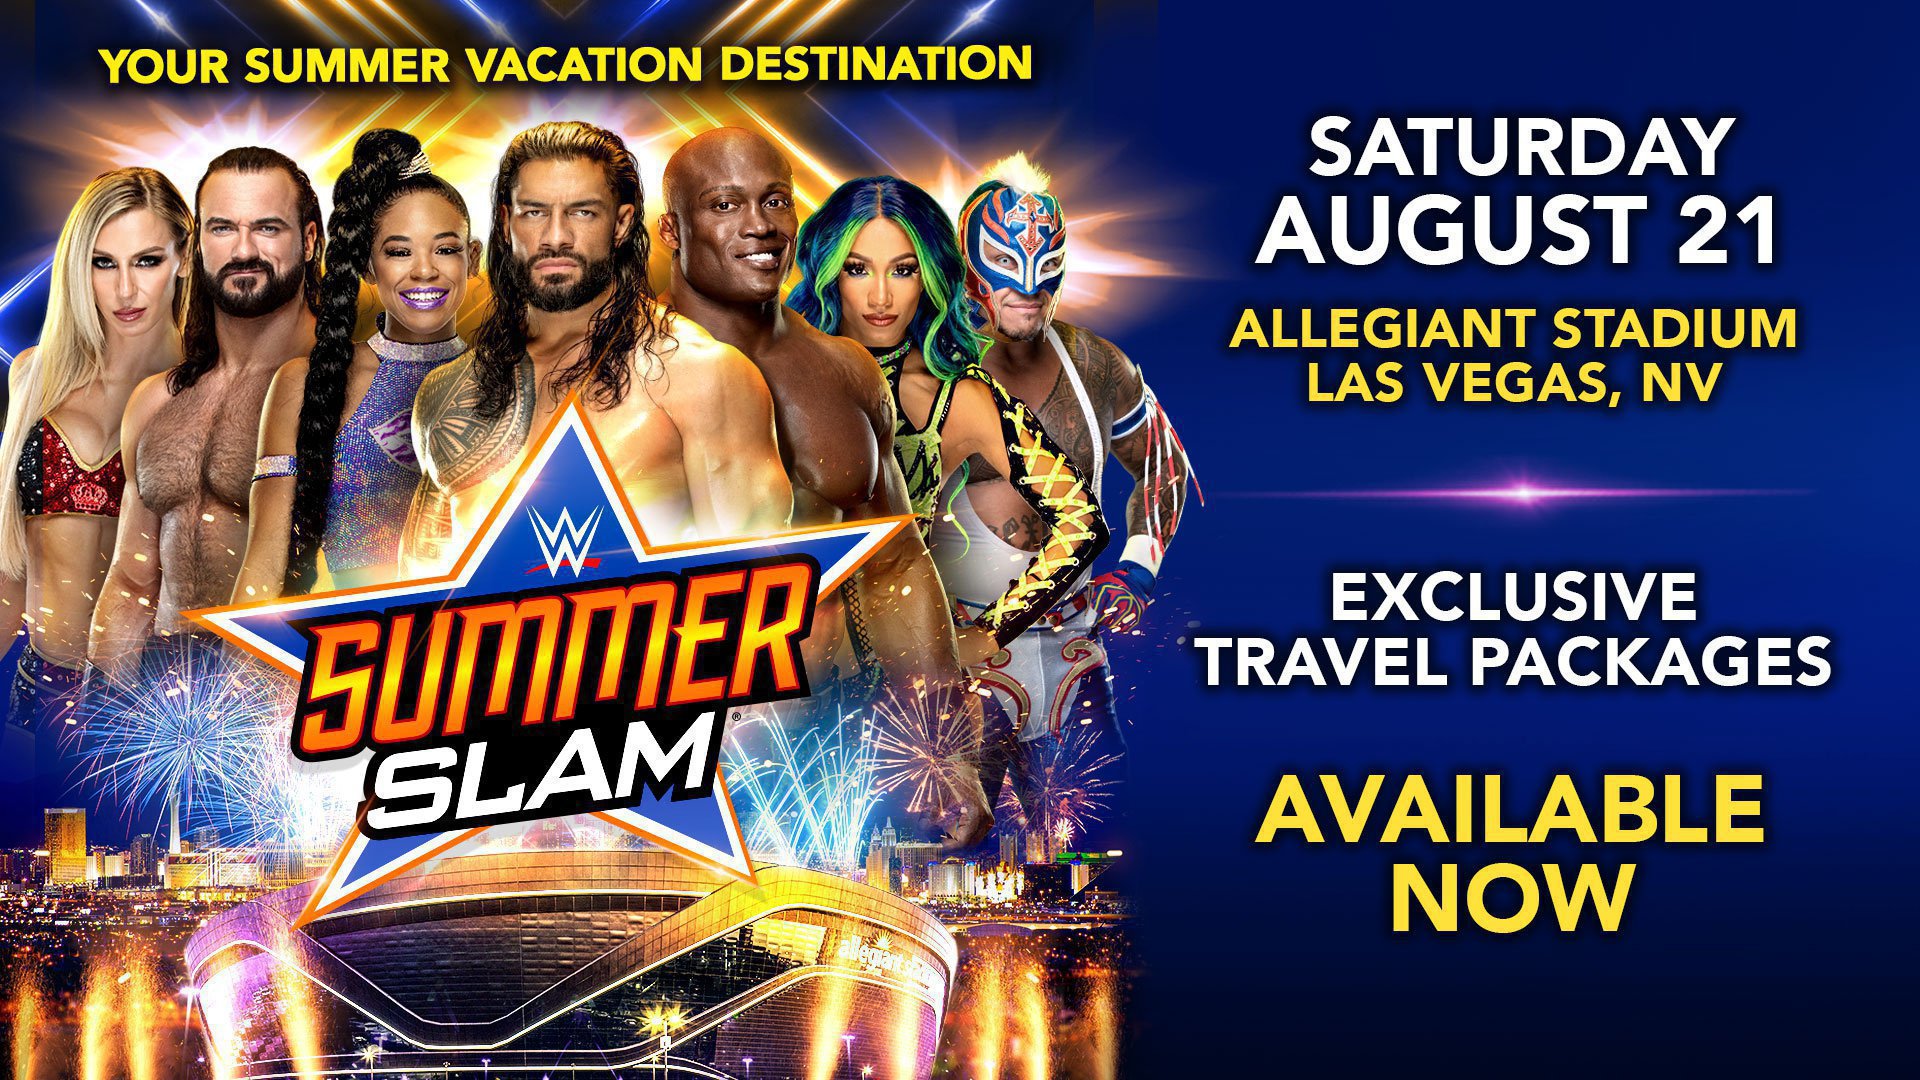 SummerSlam Travel Packages and individual tickets are available now WWE